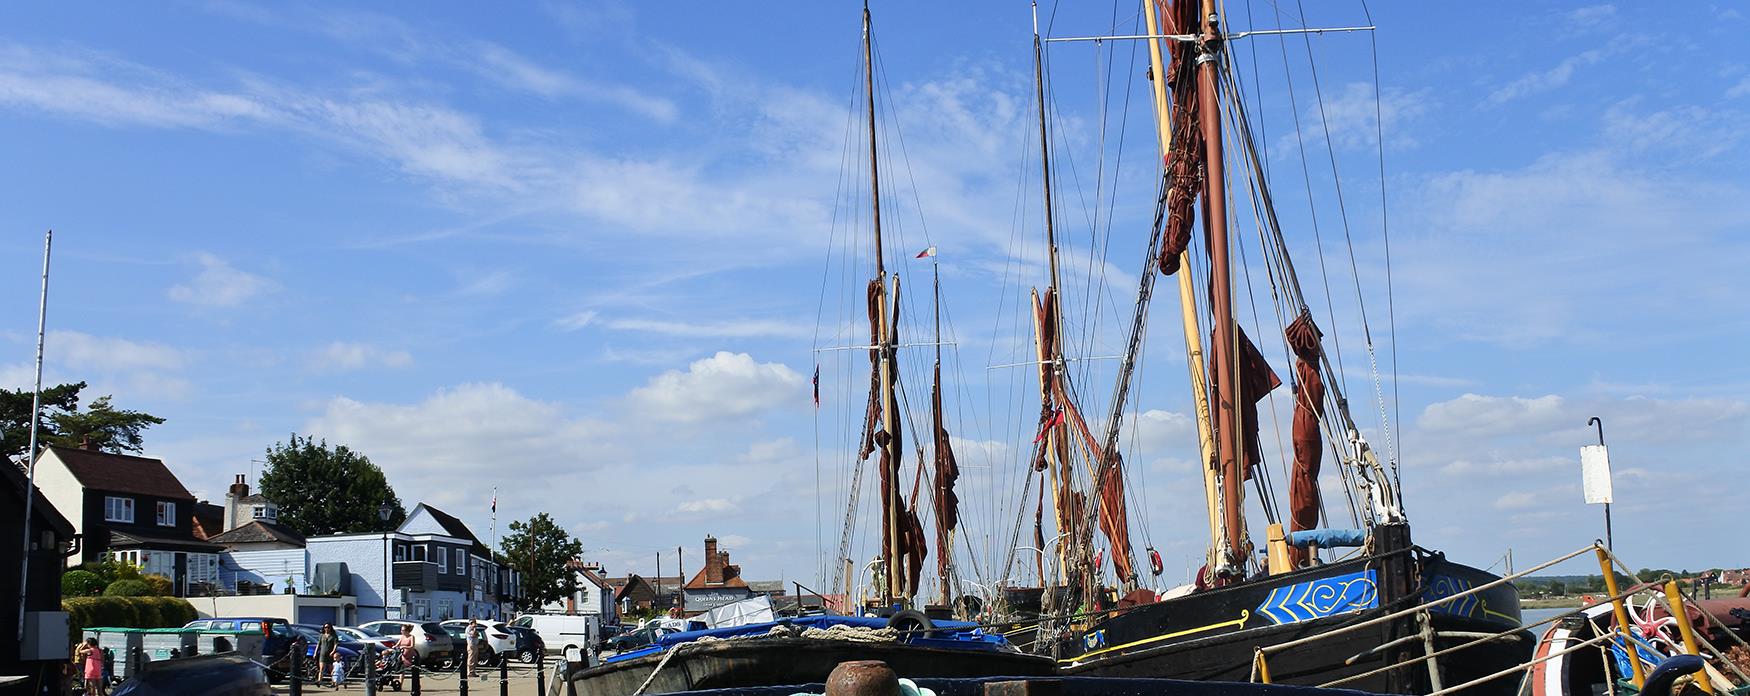 A view of the Thames Barges moored at Hythe Quay in Maldon.